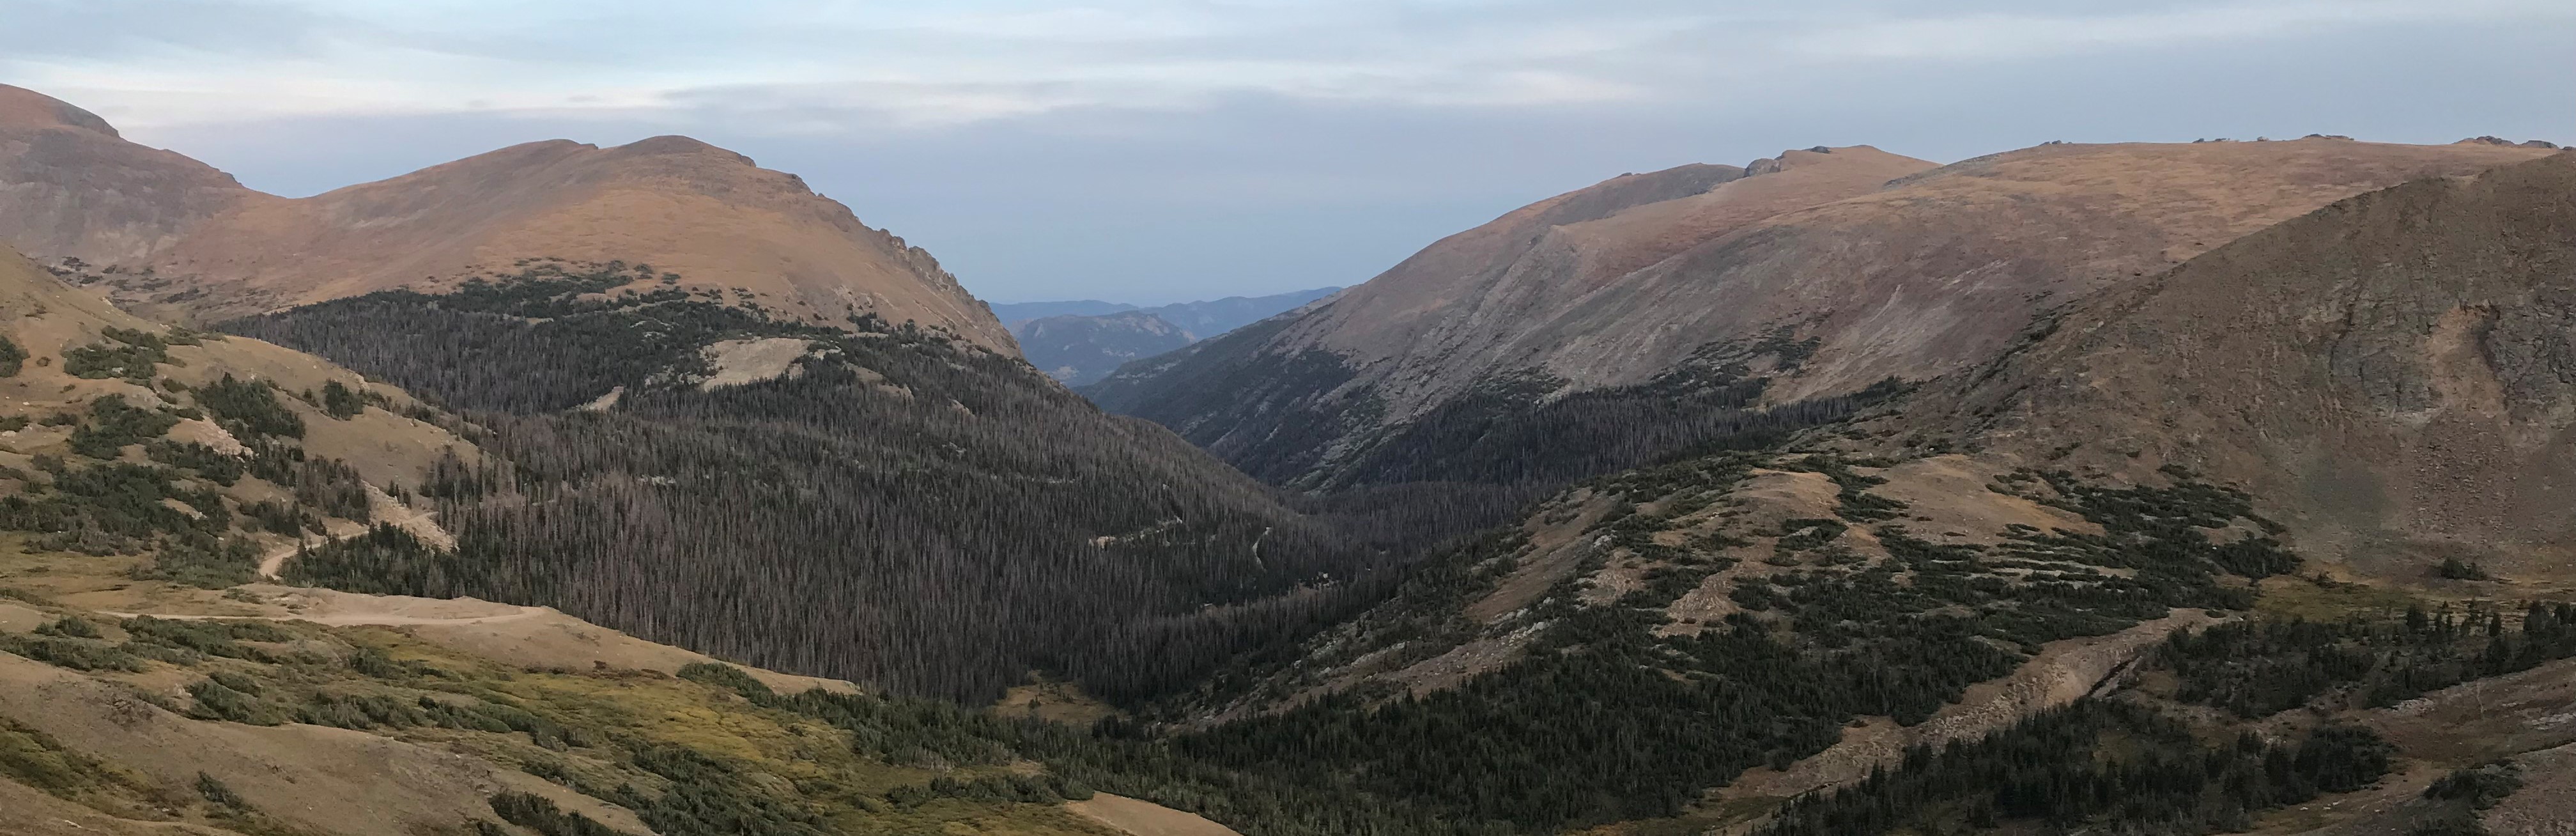 Fall River Valley between Mt. Chapin and Sundance Mountain, Rocky Mountain National Park. Max J. Kaplan. All rights reserved.